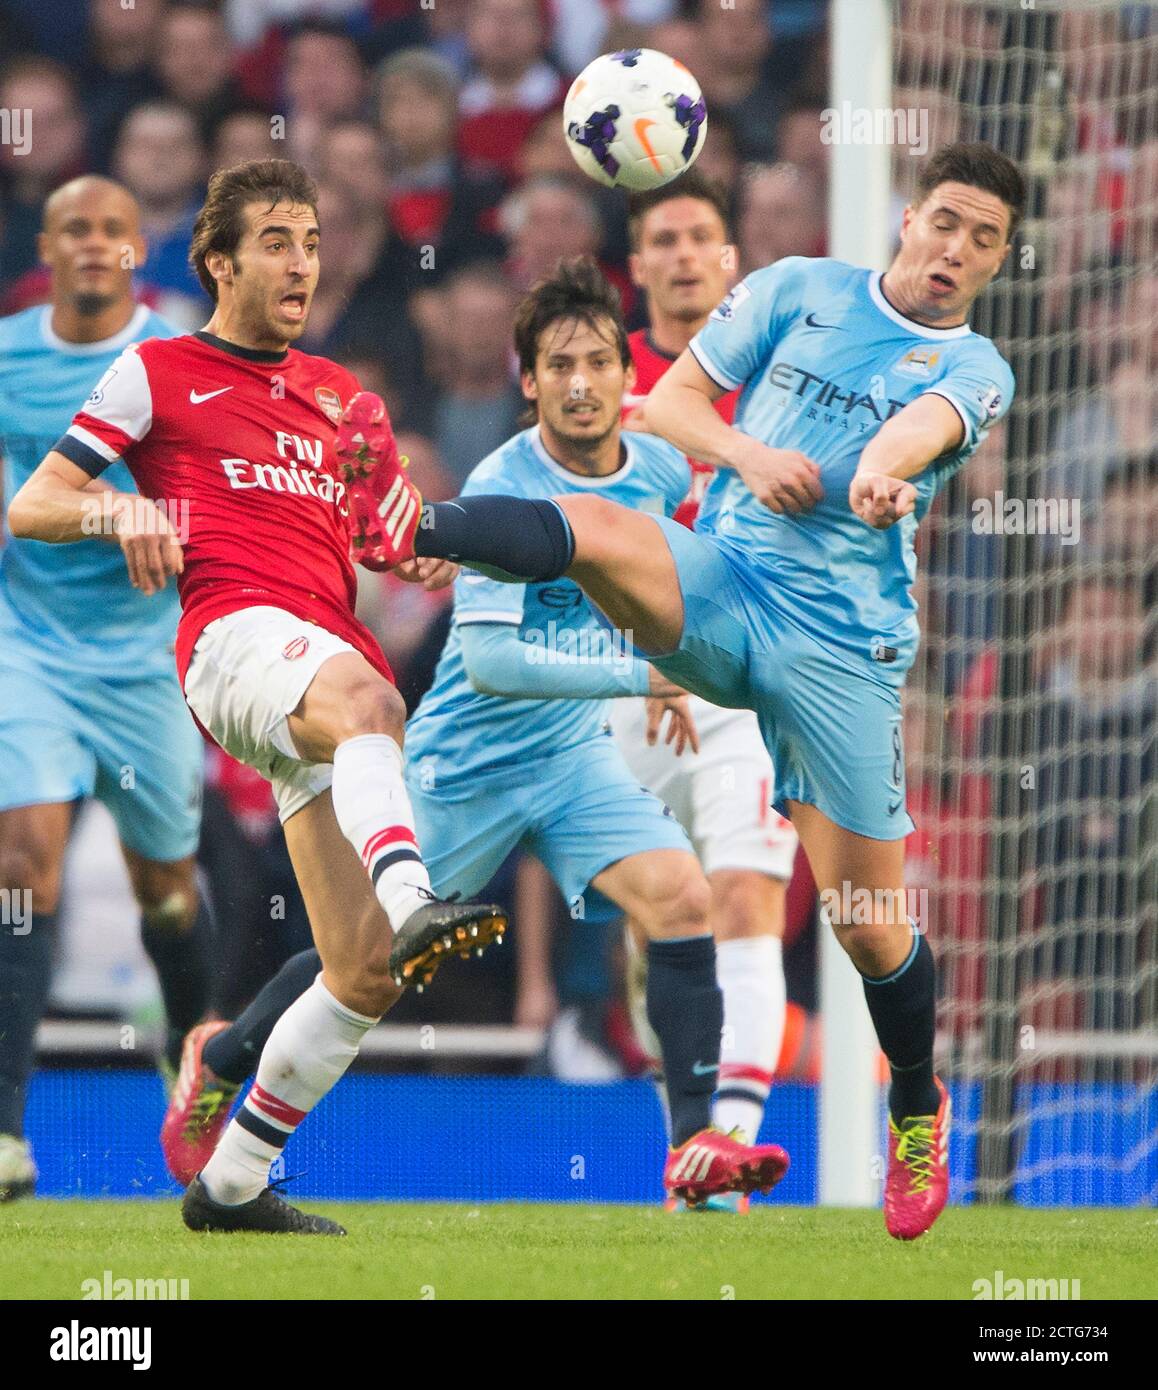 FLAMINI BATTLES FOR THE BALL WITH NASRI ARSENAL v MANCHESTER CITY, PREMIER LEAGUE - EMIRATES STADIUM PICTURE: © MARK PAIN /ALAMY Stock Photo